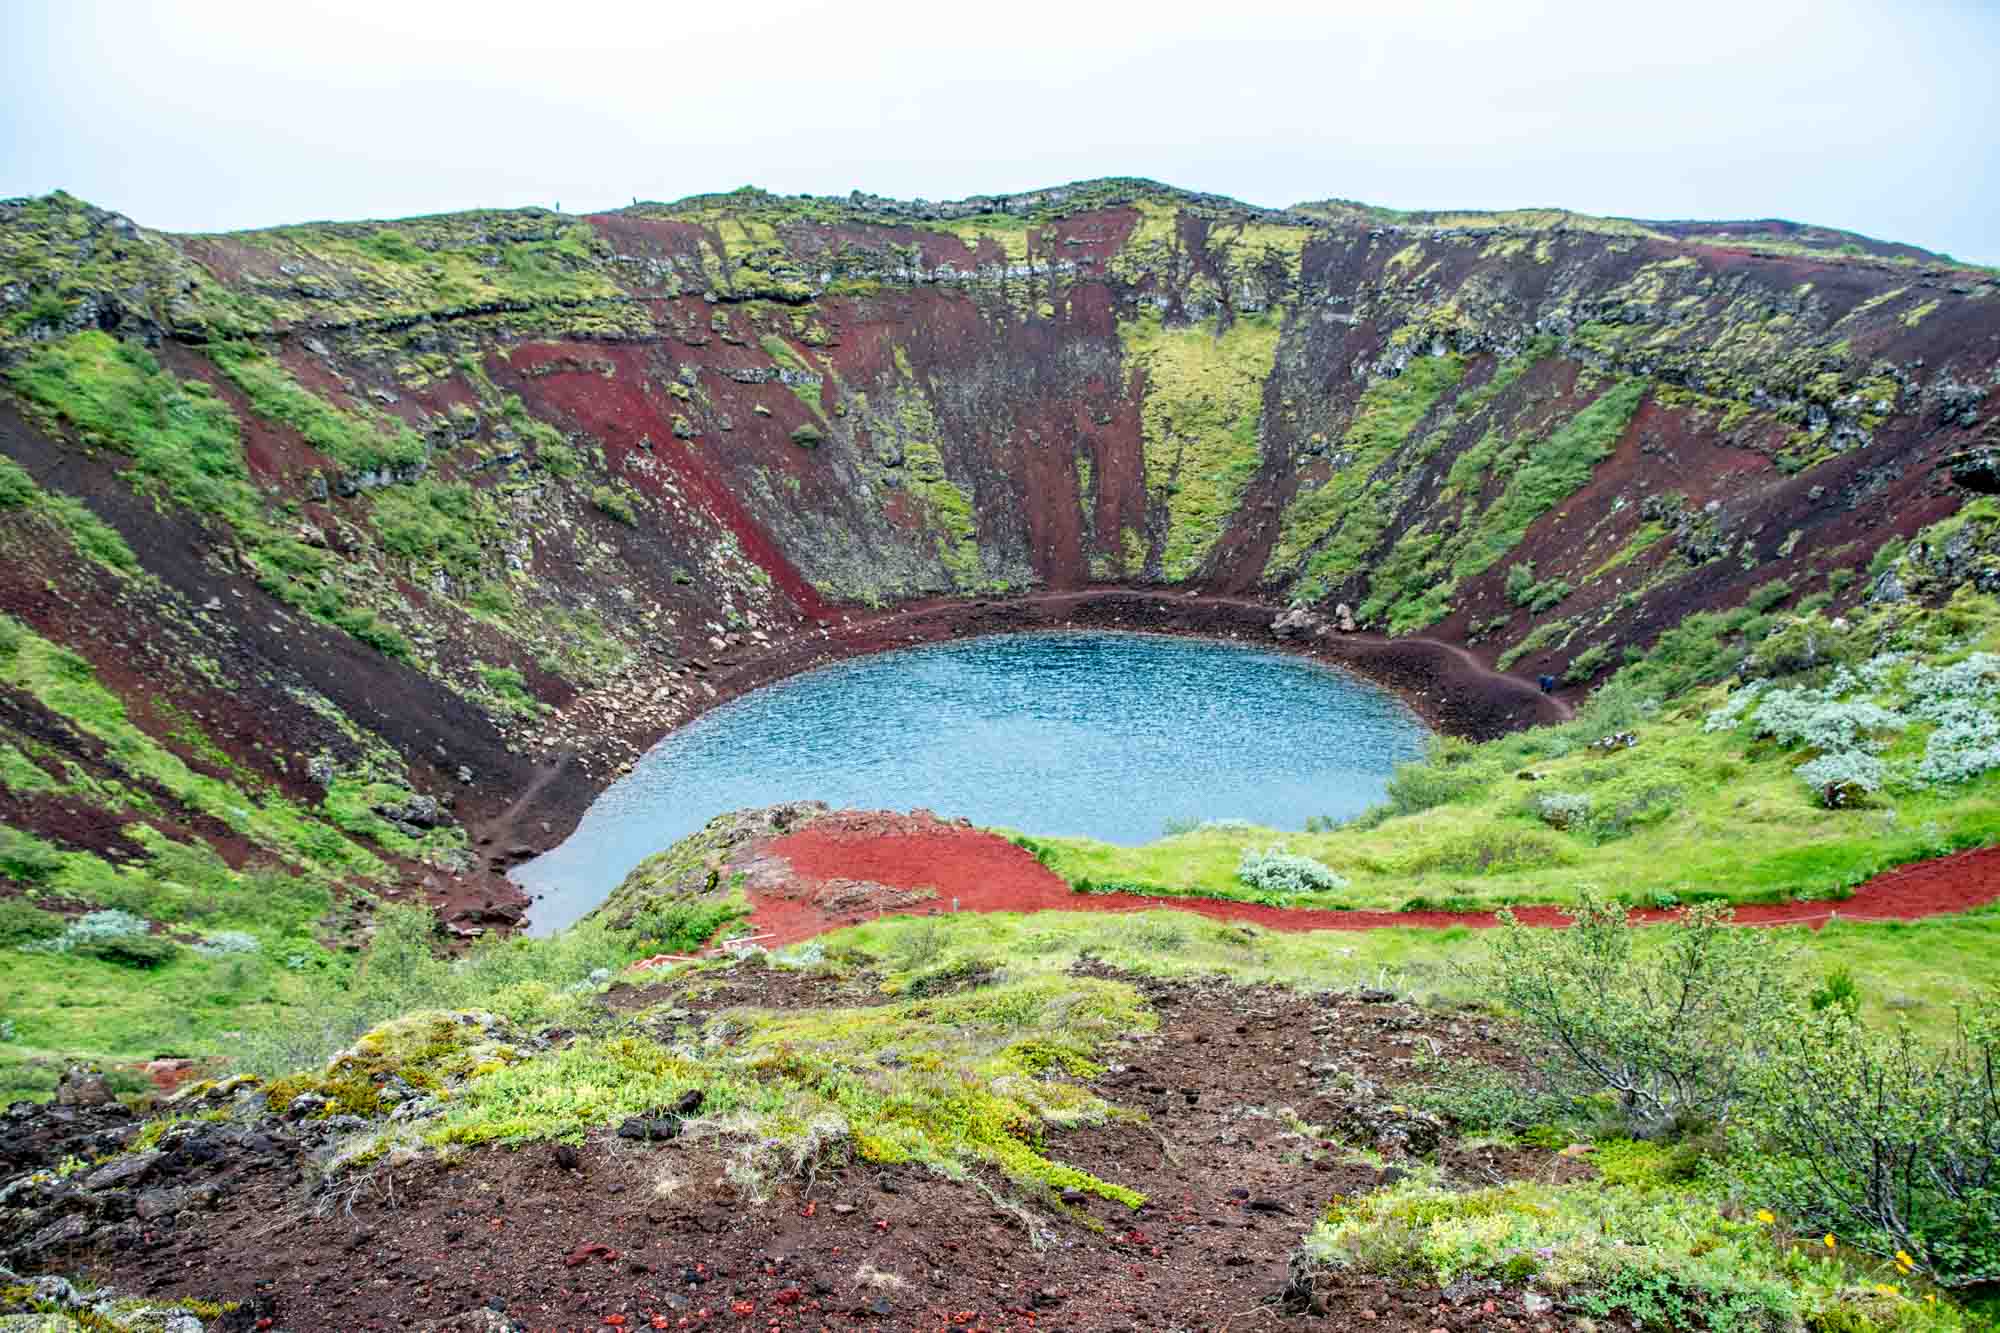 Blue lake in a volcano crater